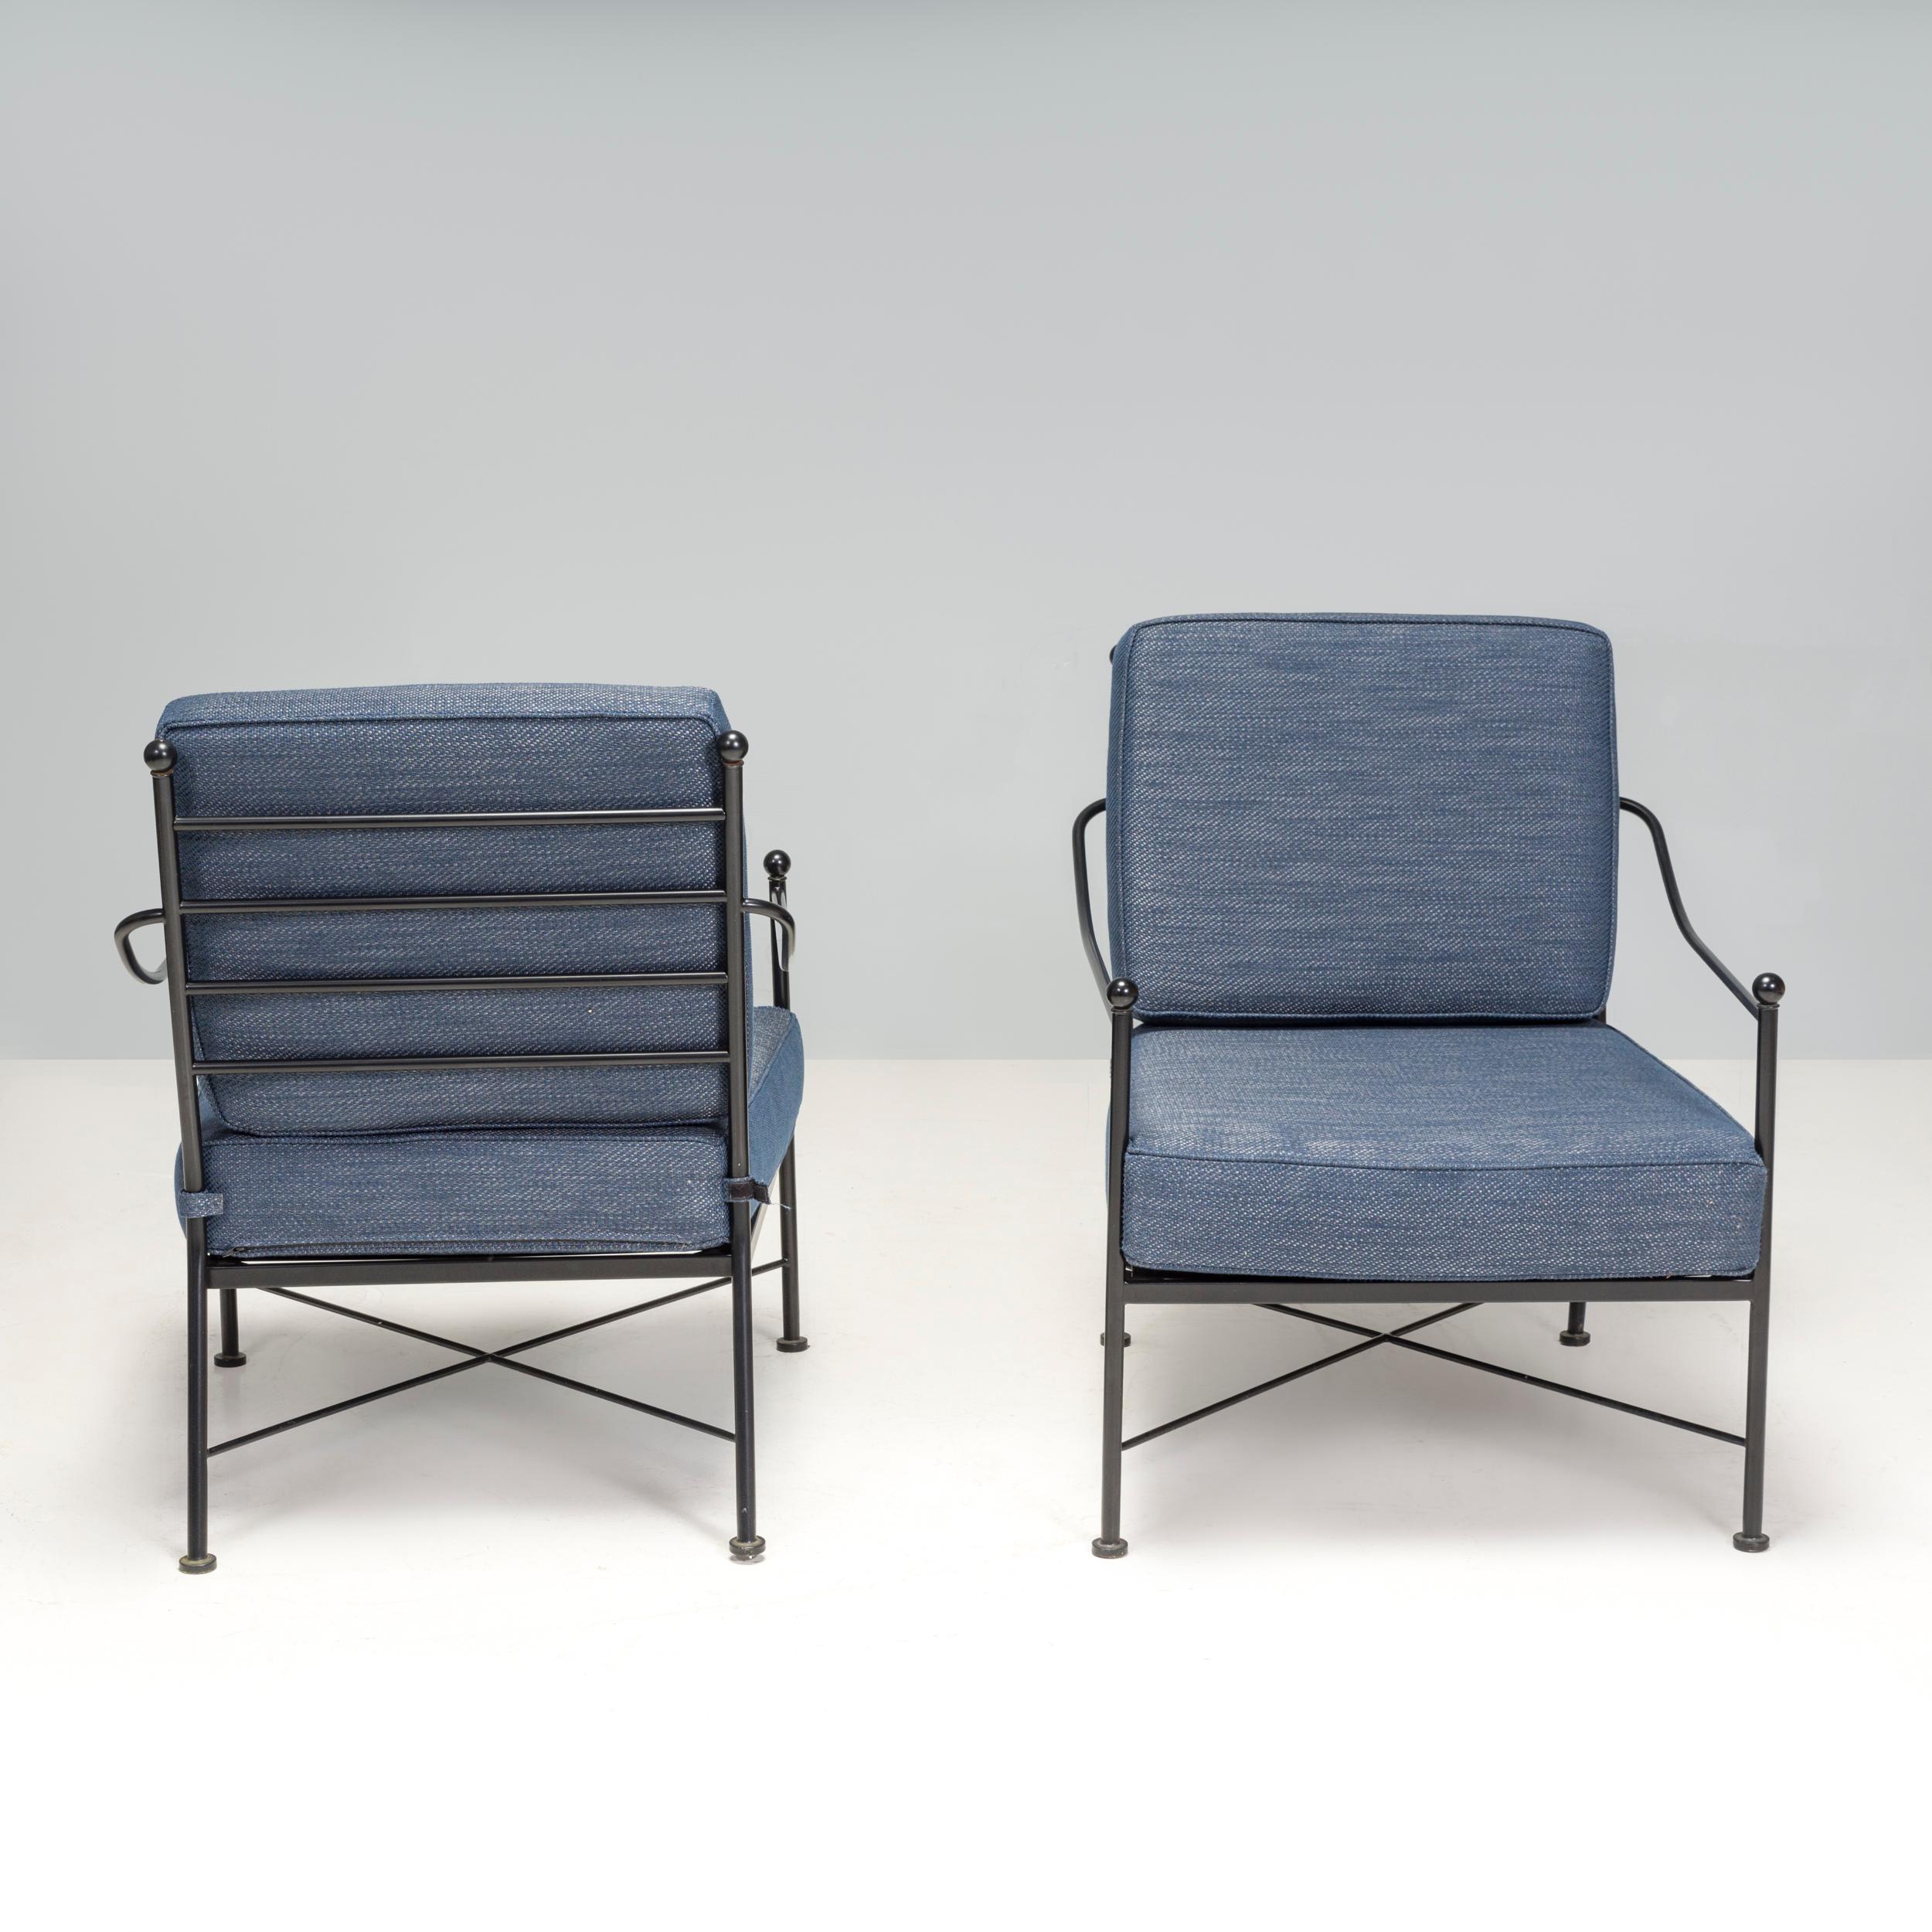 British Wrought Iron Outdoor Blue Armchairs, Set of 2 For Sale